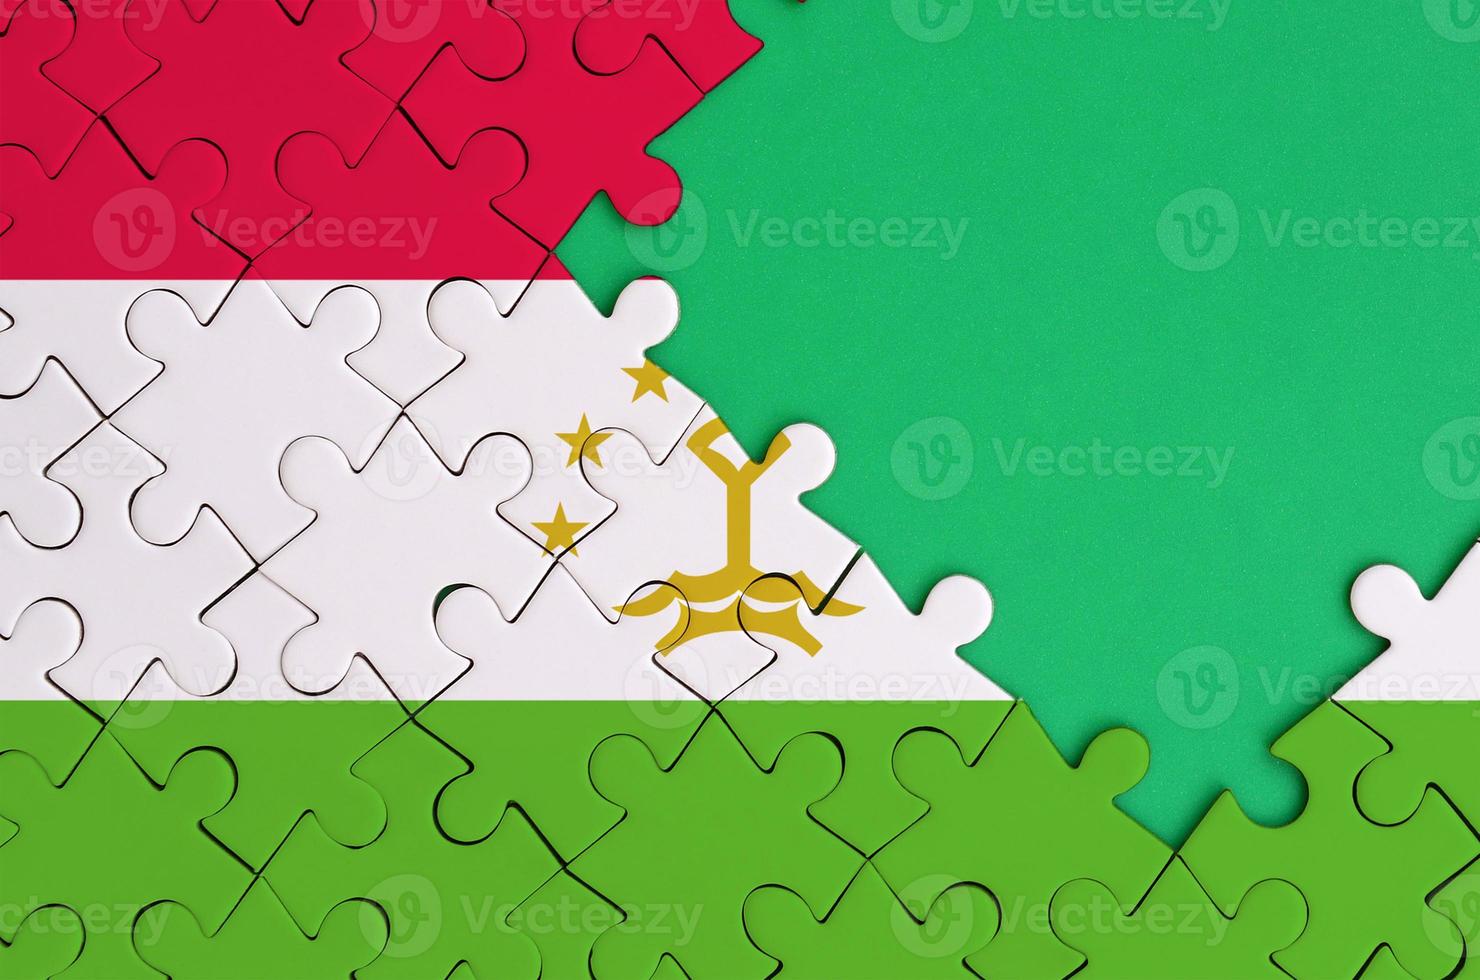 Tajikistan flag  is depicted on a completed jigsaw puzzle with free green copy space on the right side photo